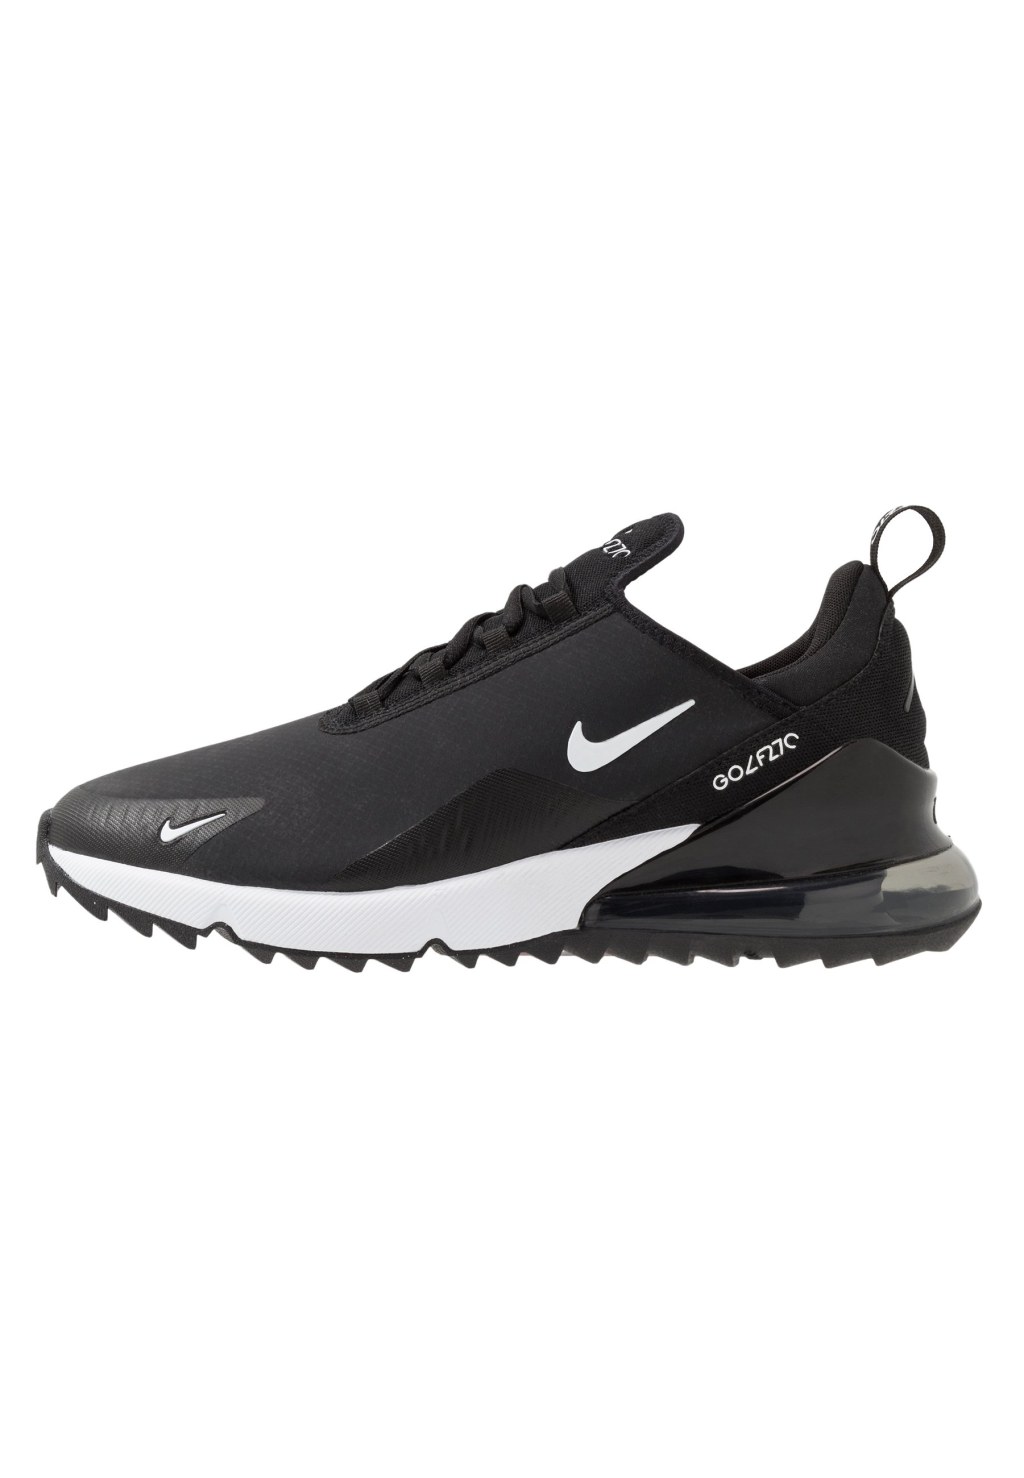 Picture of: Nike Golf AIR MAX  G – Golfschuh – black/white/hot punch